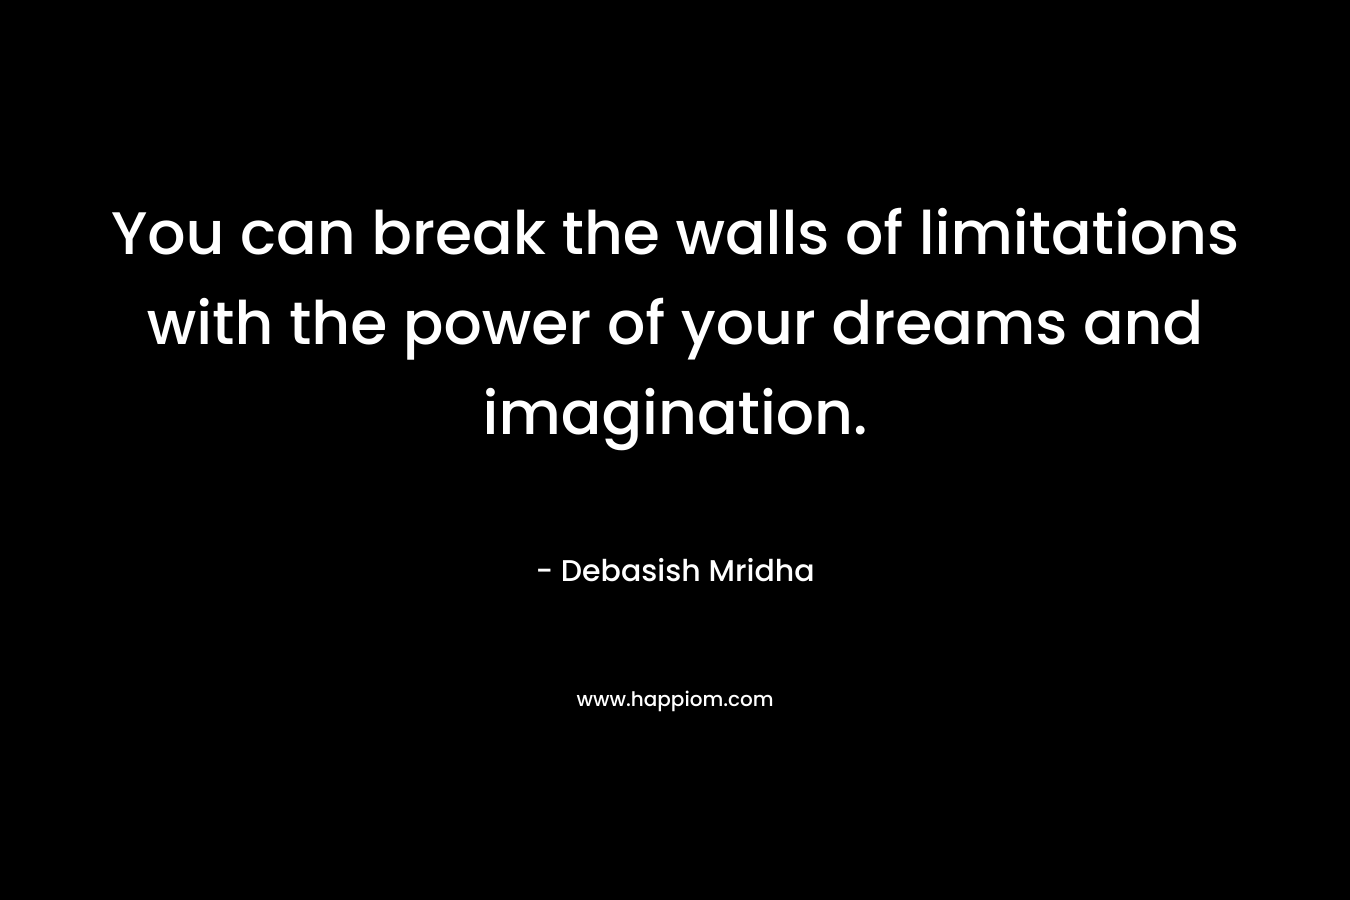 You can break the walls of limitations with the power of your dreams and imagination.